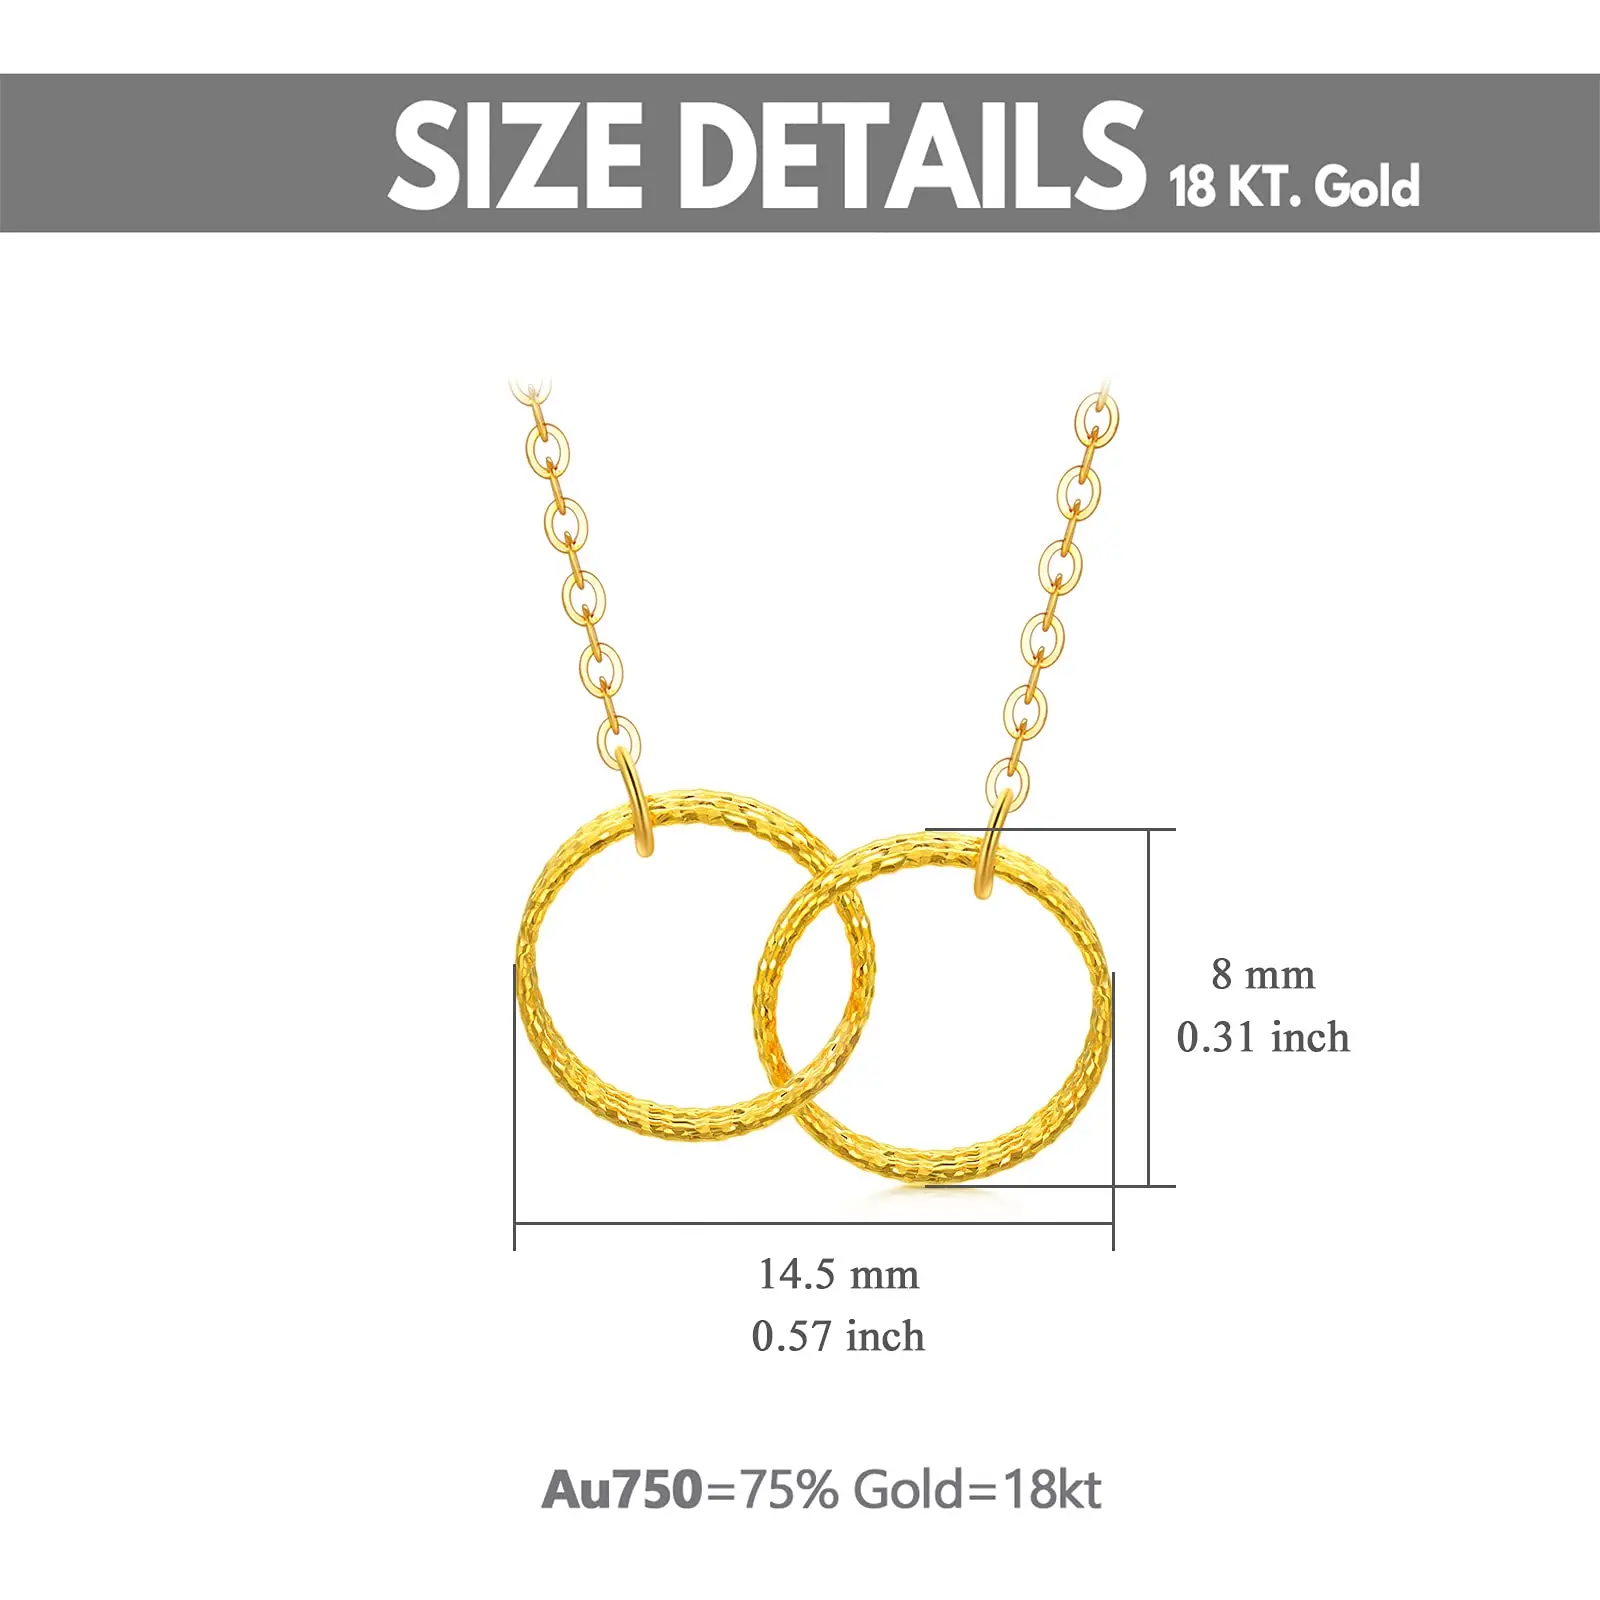 YFN 18k Yellow Gold Weave Circle Interlocking Necklace for Women Love Jewelry Gifts for Wife Girlfriend 16-17 Inch